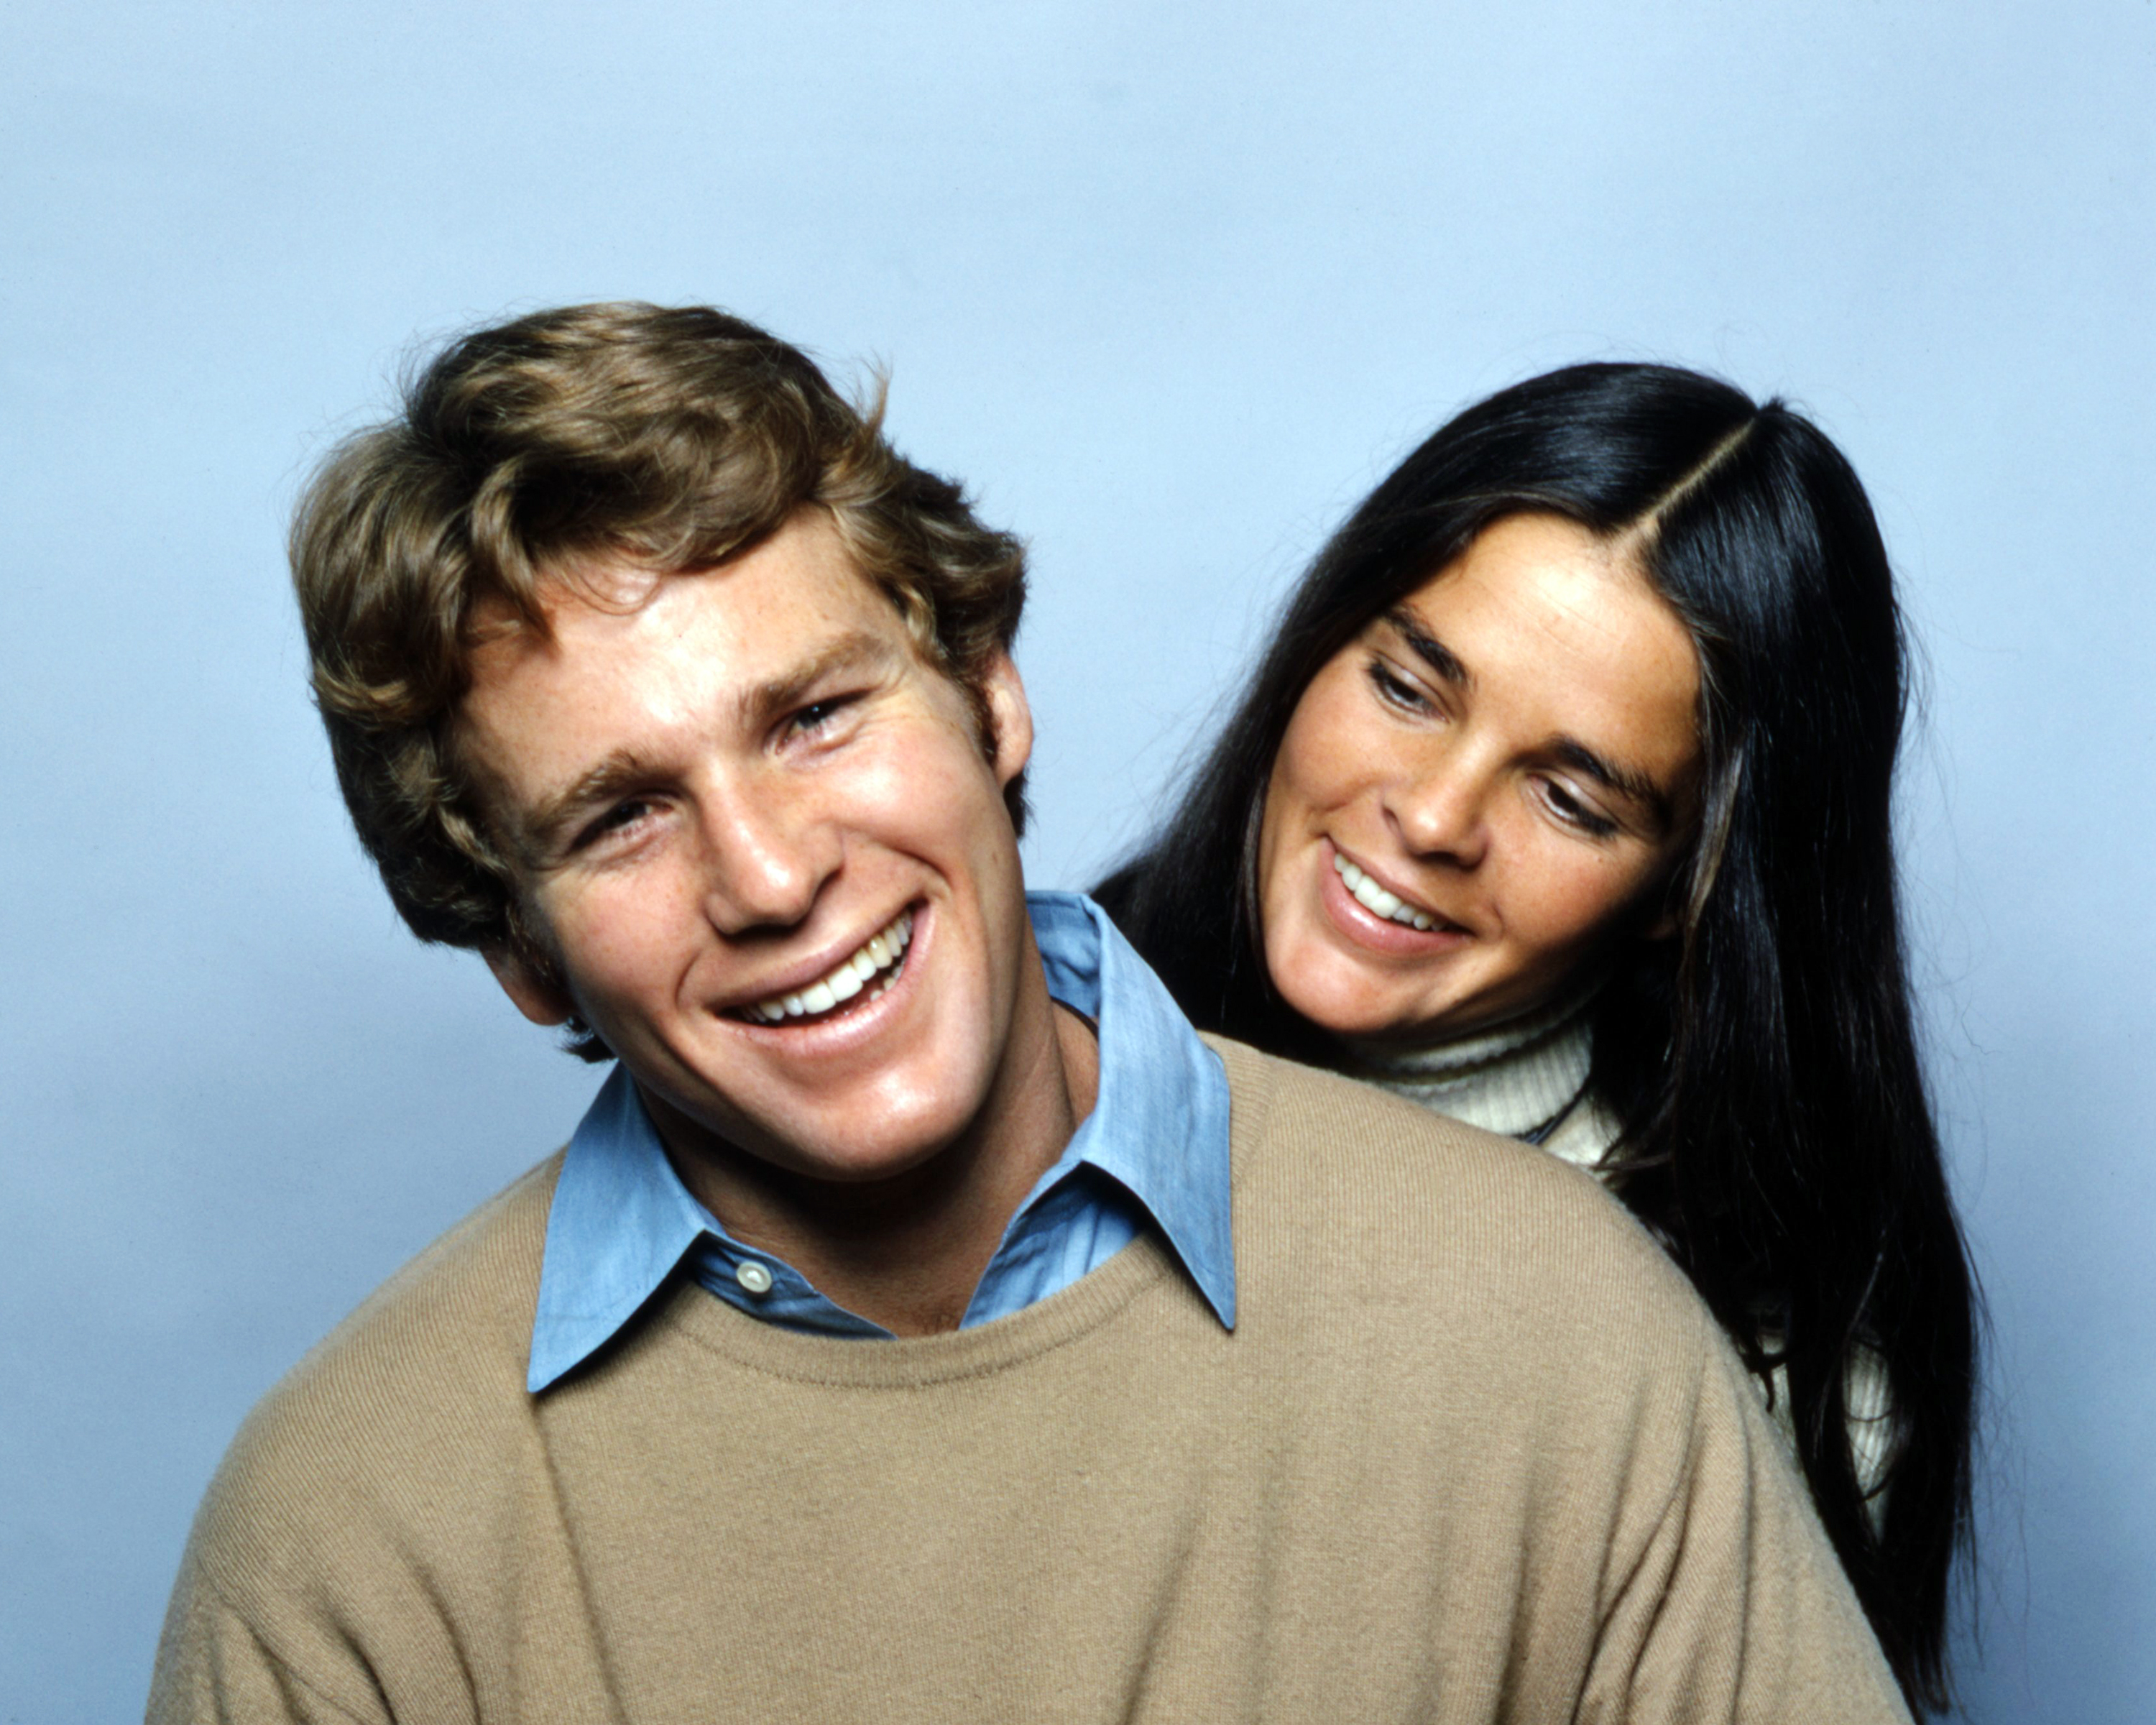 Ryan O'Neal and Ali MacGraw photographed for 'Love Story' in 1970 | Source: Getty Images